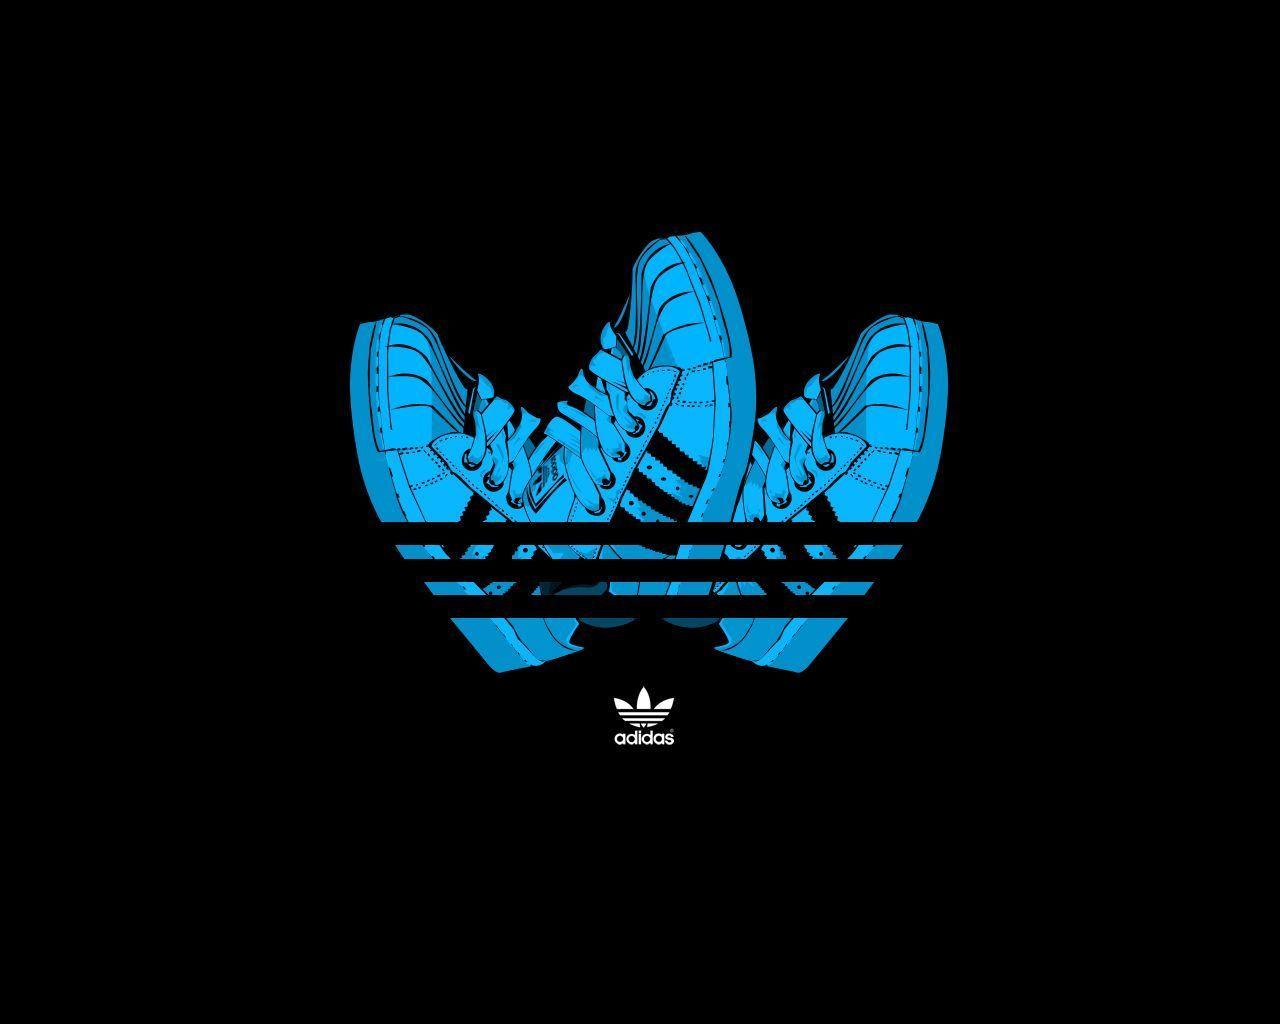 Adidas Wallpaper for mobile phone tablet desktop computer and other  devices HD and 4K wallpa  Adidas wallpapers Adidas iphone wallpaper  Adidas logo wallpapers